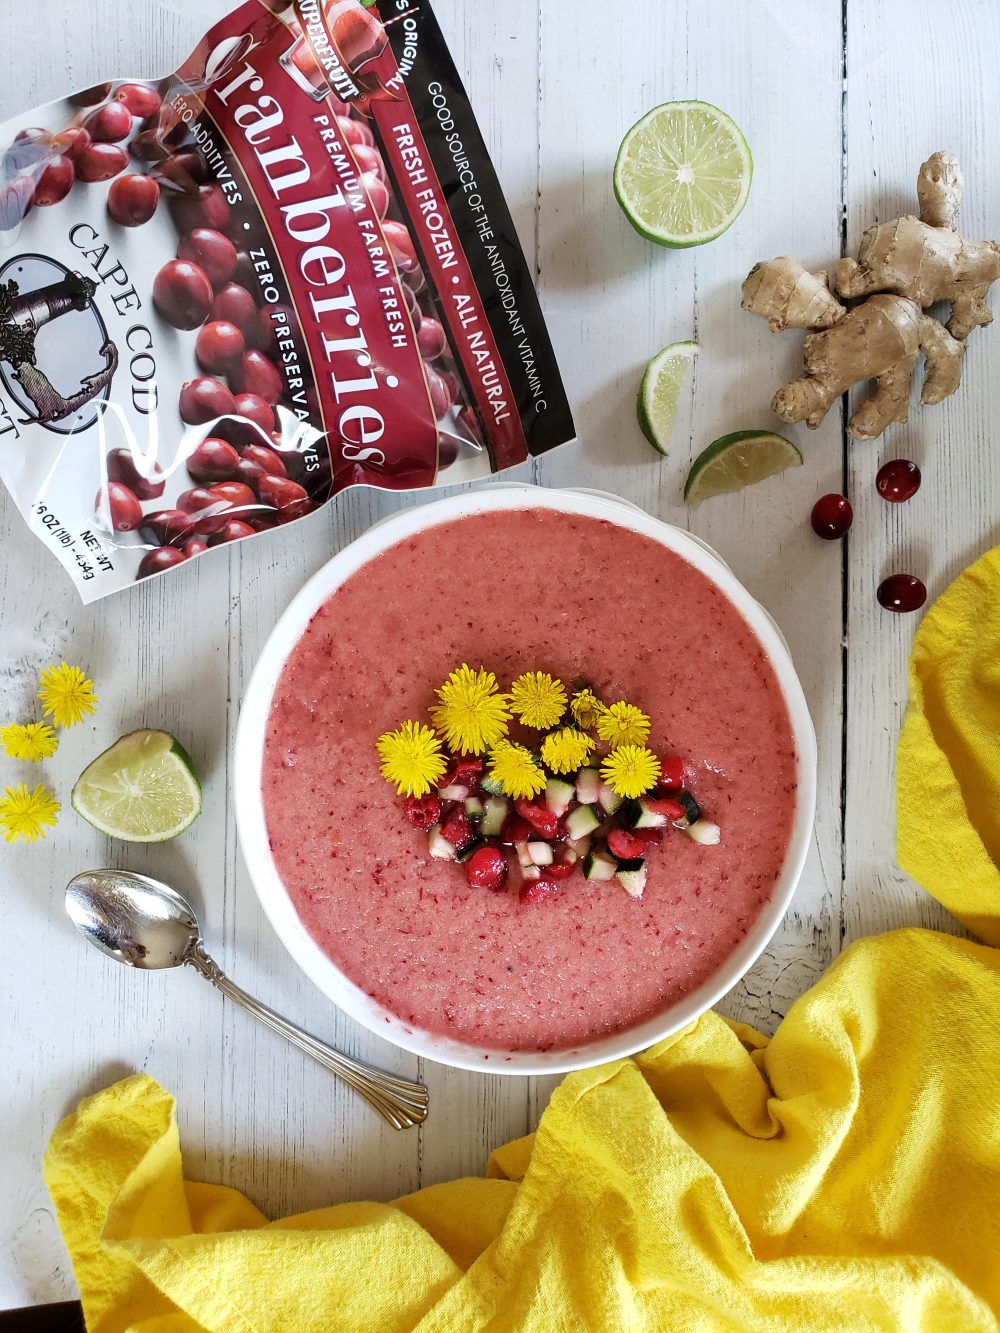 Cranberry Gazpacho with Cape Code Select 